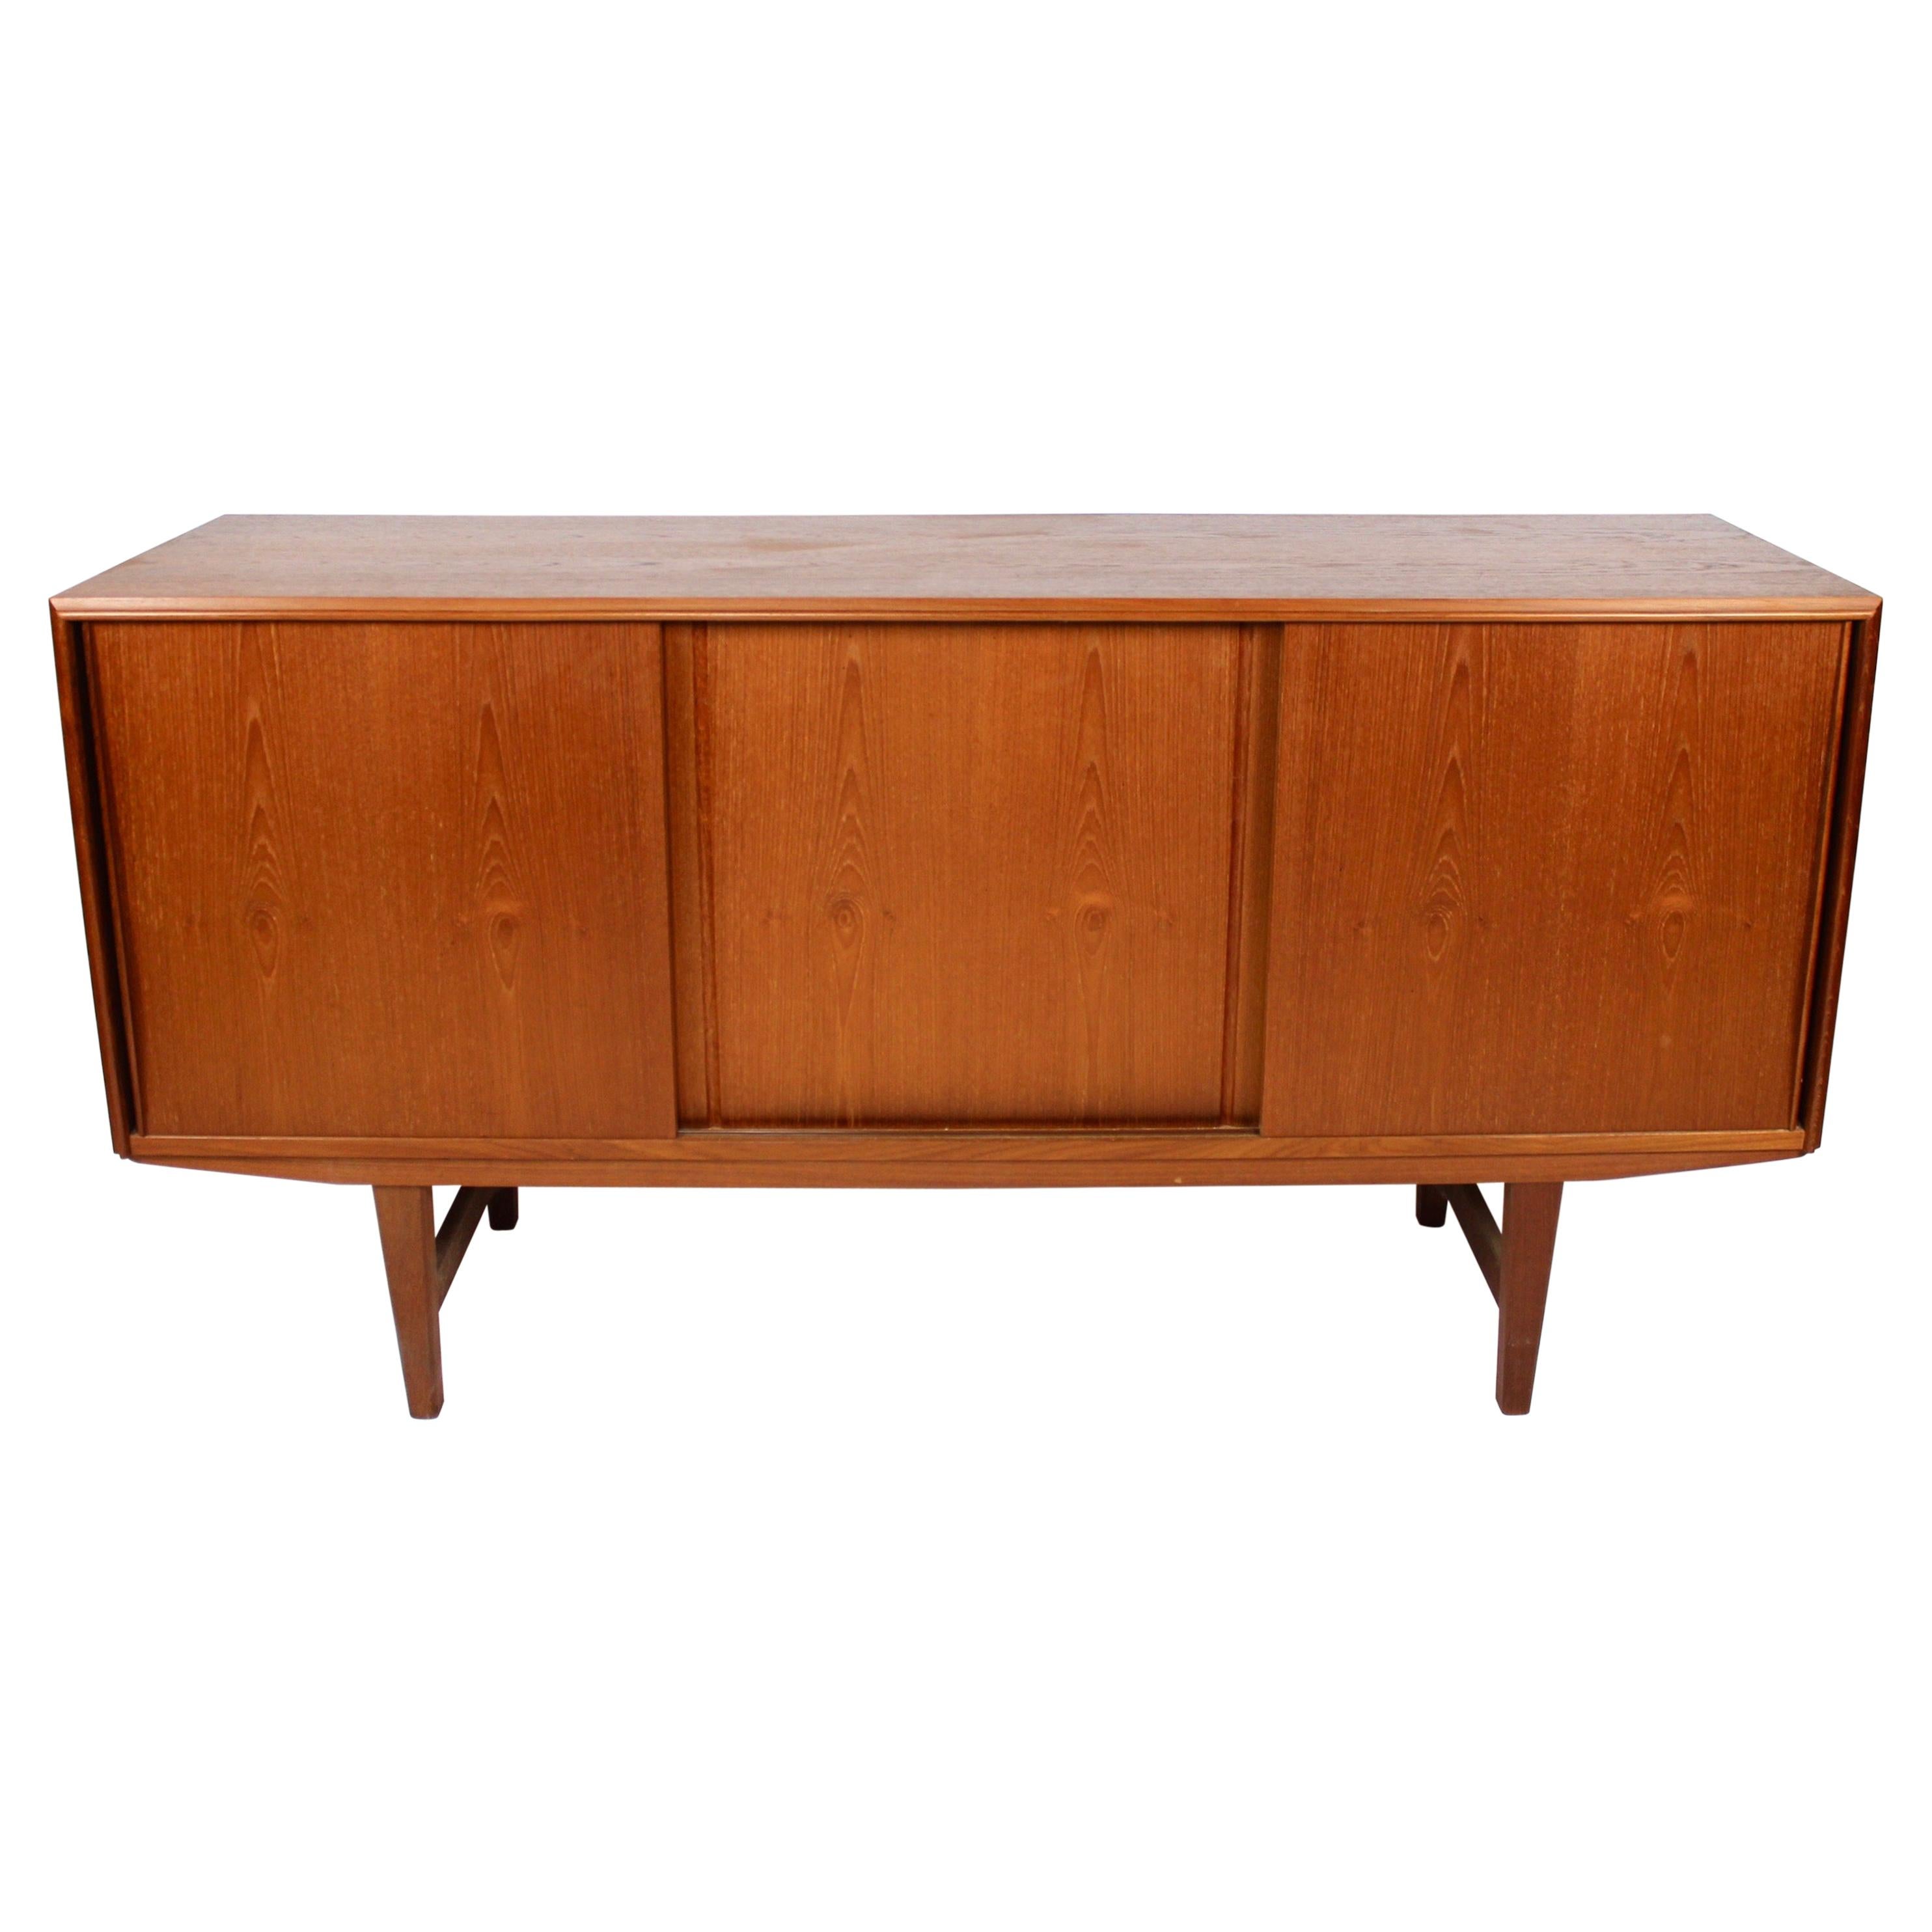 Sideboard in Teak of Danish Design from the 1960s For Sale